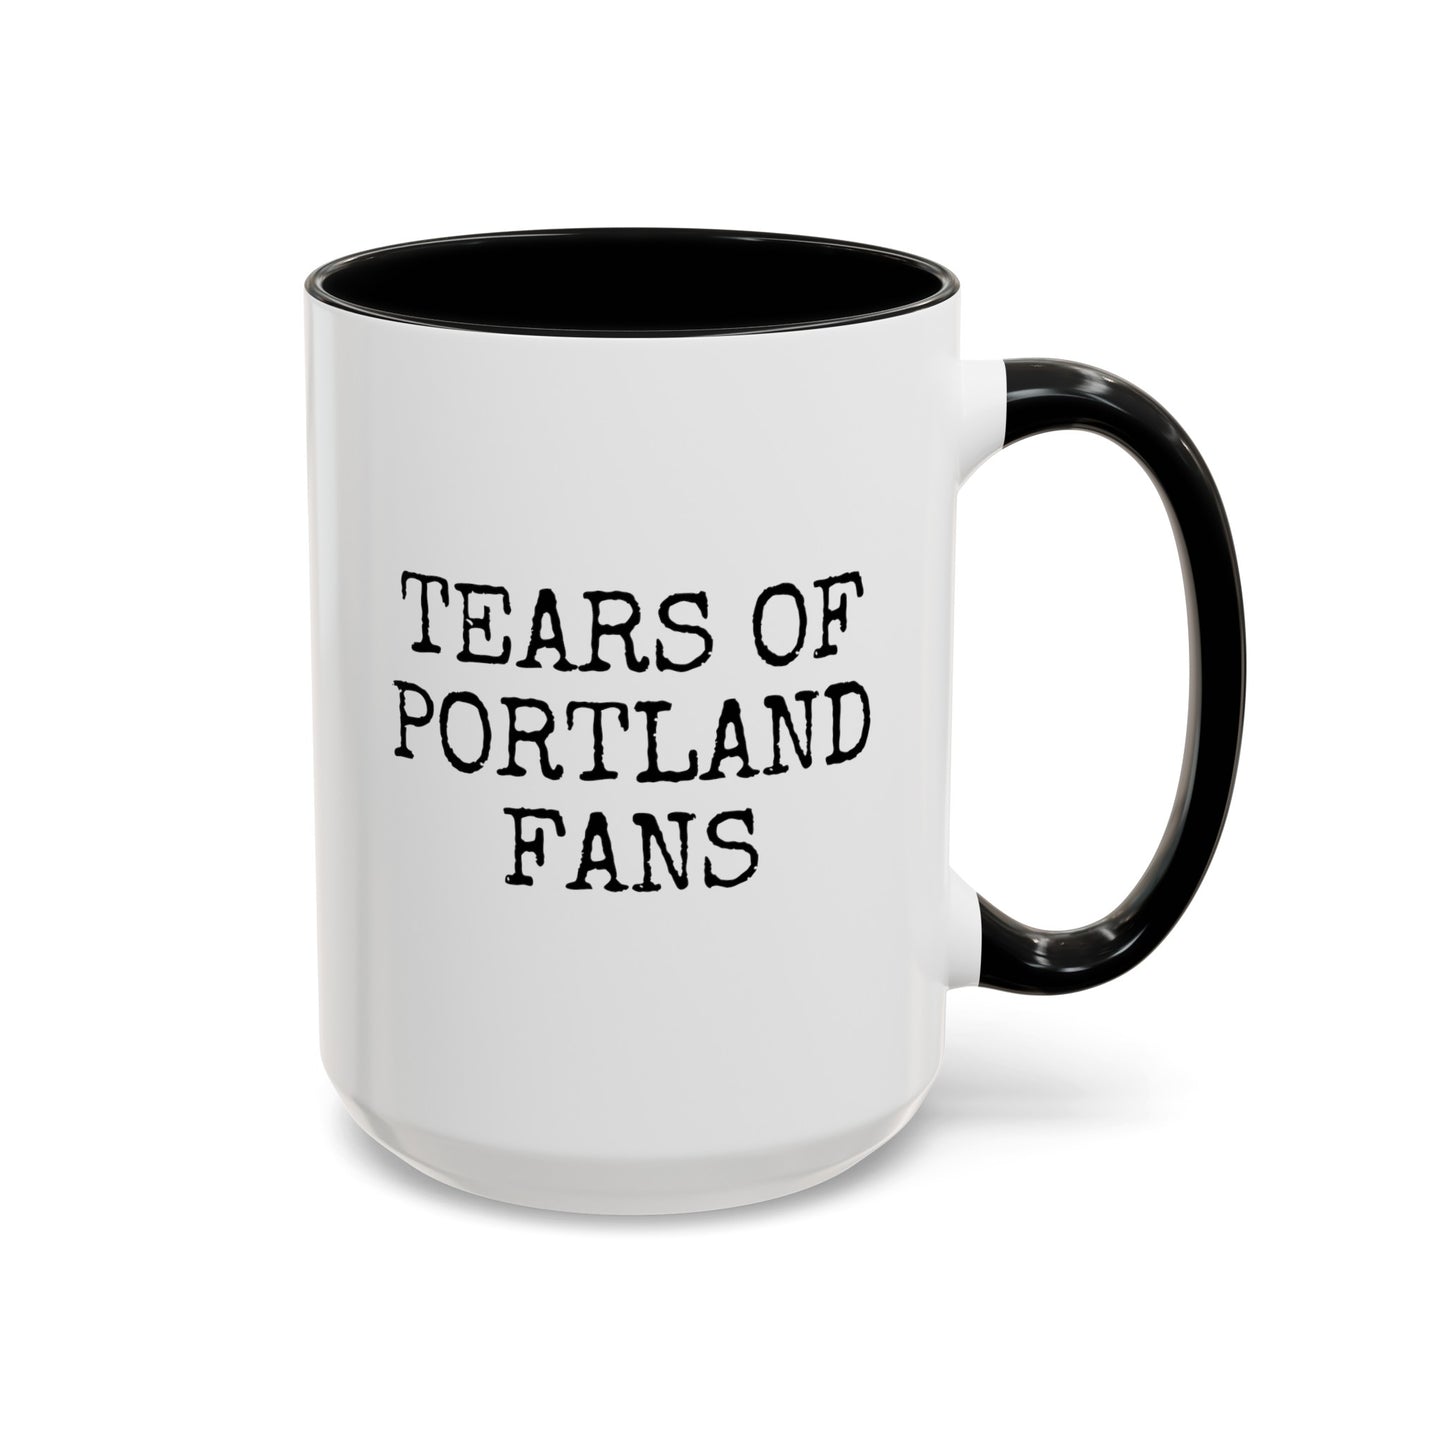 Tears Of Portland Fans 15oz white with black accent funny large coffee mug gift for football footie soccer cup futbol is life waveywares wavey wares wavywares wavy wares